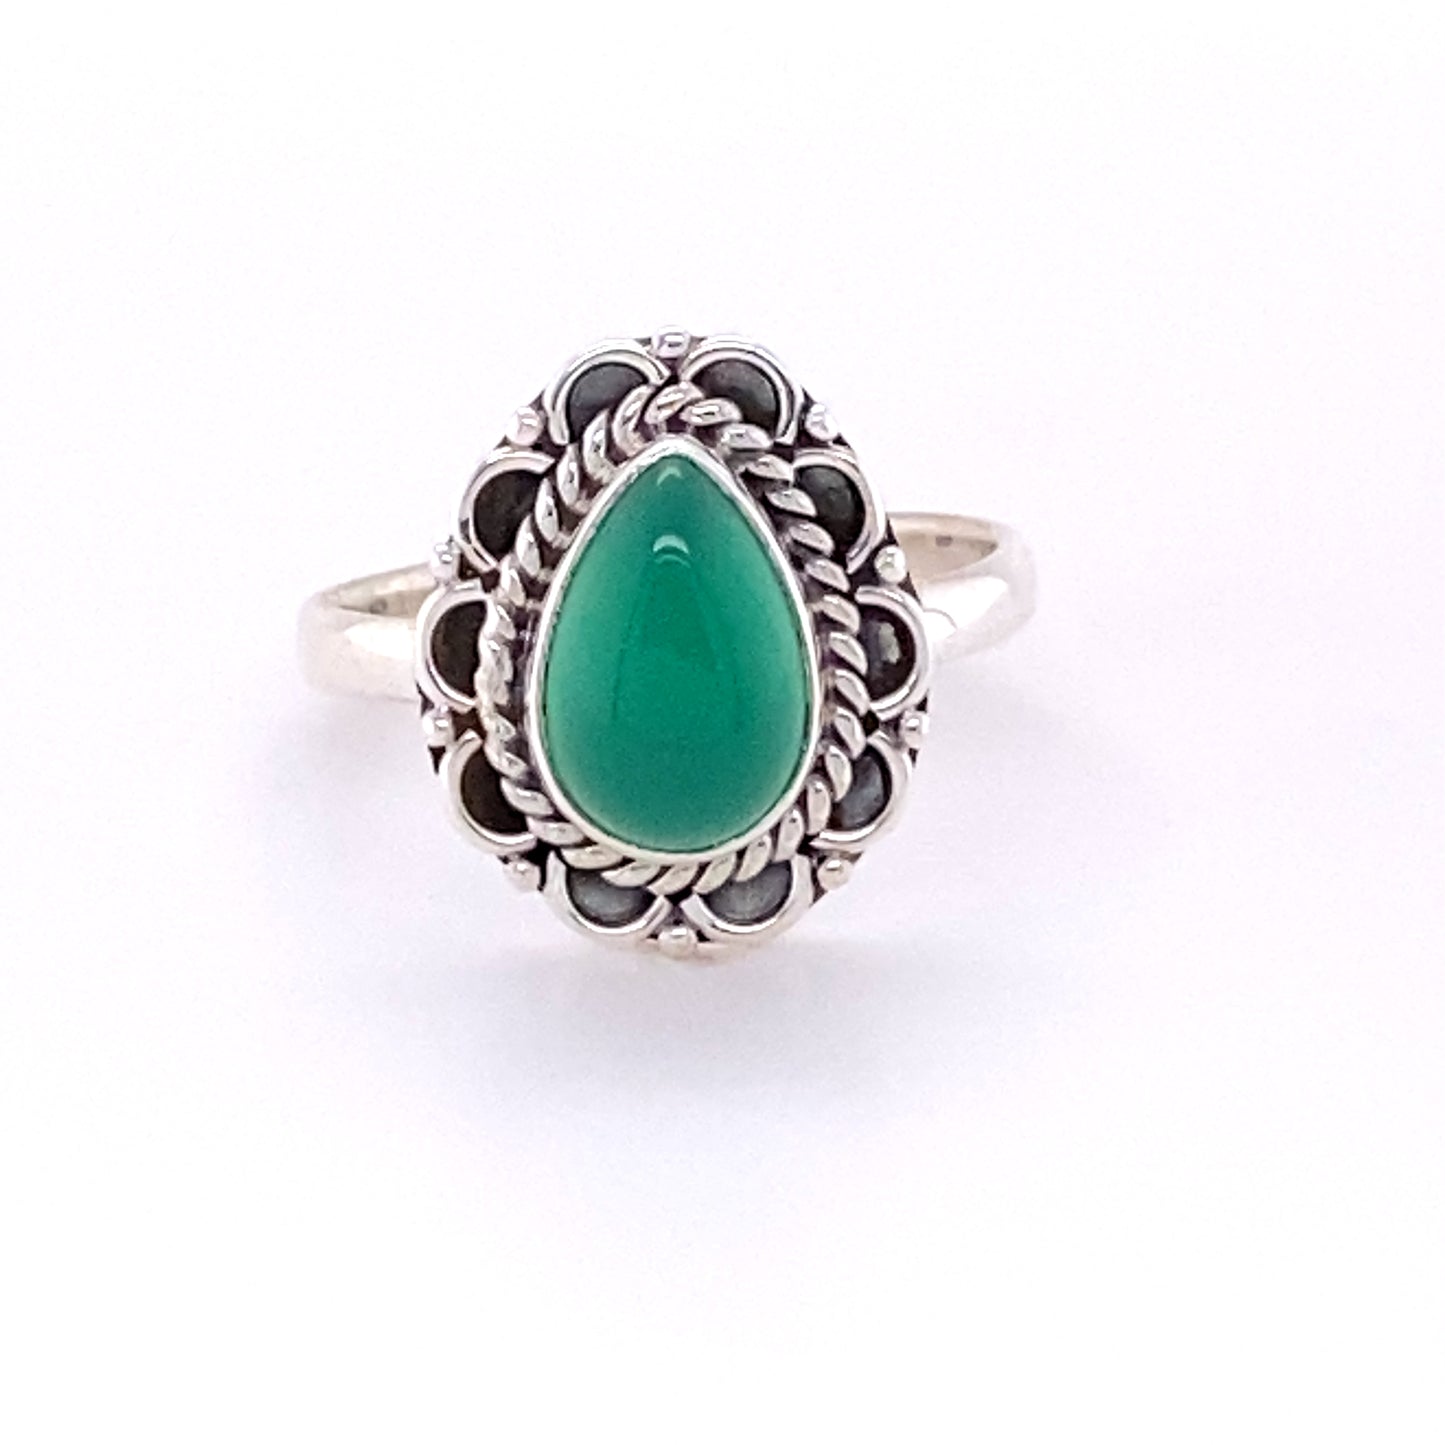 
                  
                    A Teardrop Gemstone Ring with Flower Filigree Border with a green jade cabochon stone.
                  
                